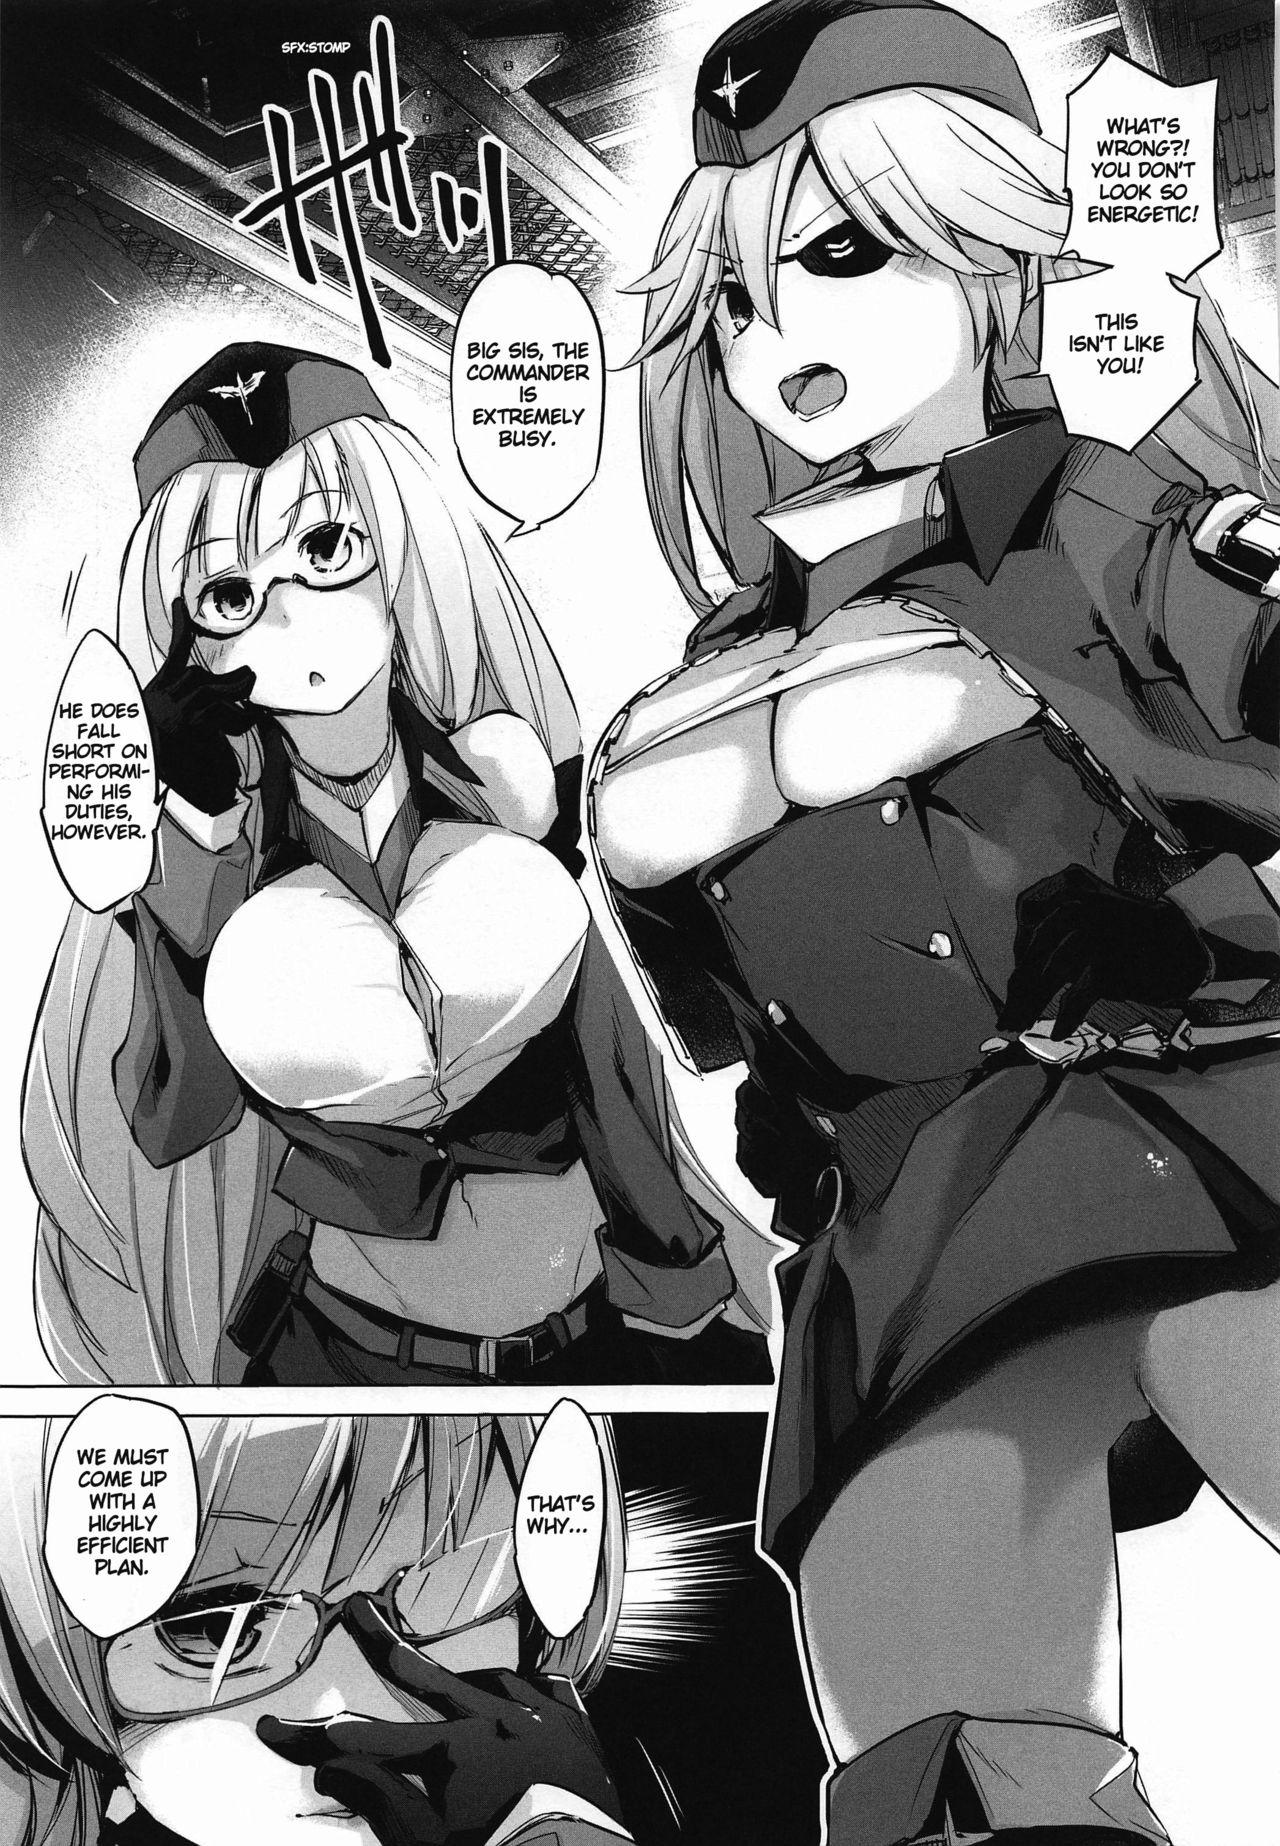 Maid Insufficient main force to shoot ! Iron-Blood Battleship and Battle Cruiser Summary Book - Azur lane Butthole - Page 4